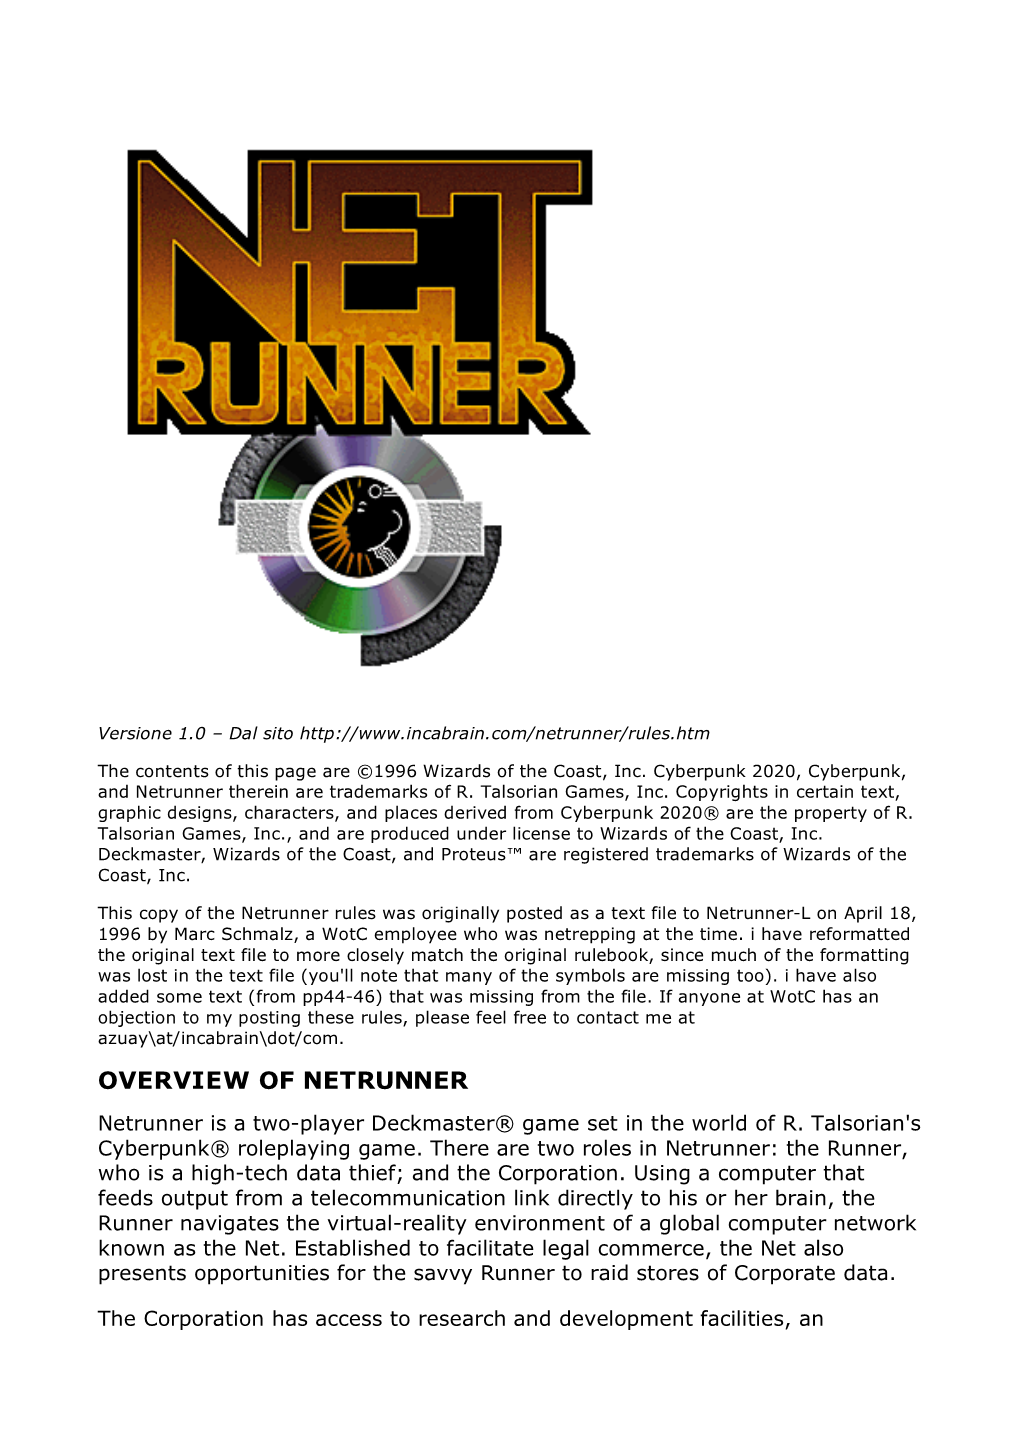 OVERVIEW of NETRUNNER Netrunner Is a Two-Player Deckmaster® Game Set in the World of R